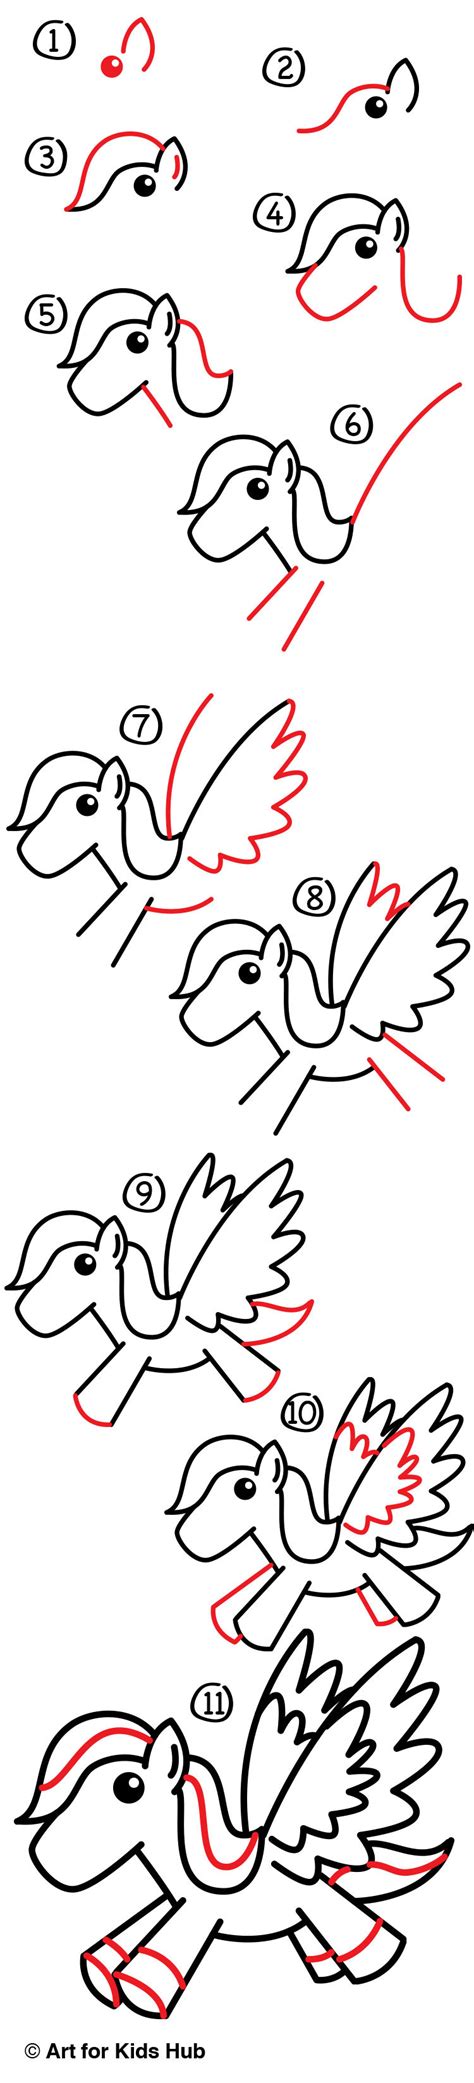 The latest tutorial over there is: How To Draw A Cartoon Pegasus - Art For Kids Hub